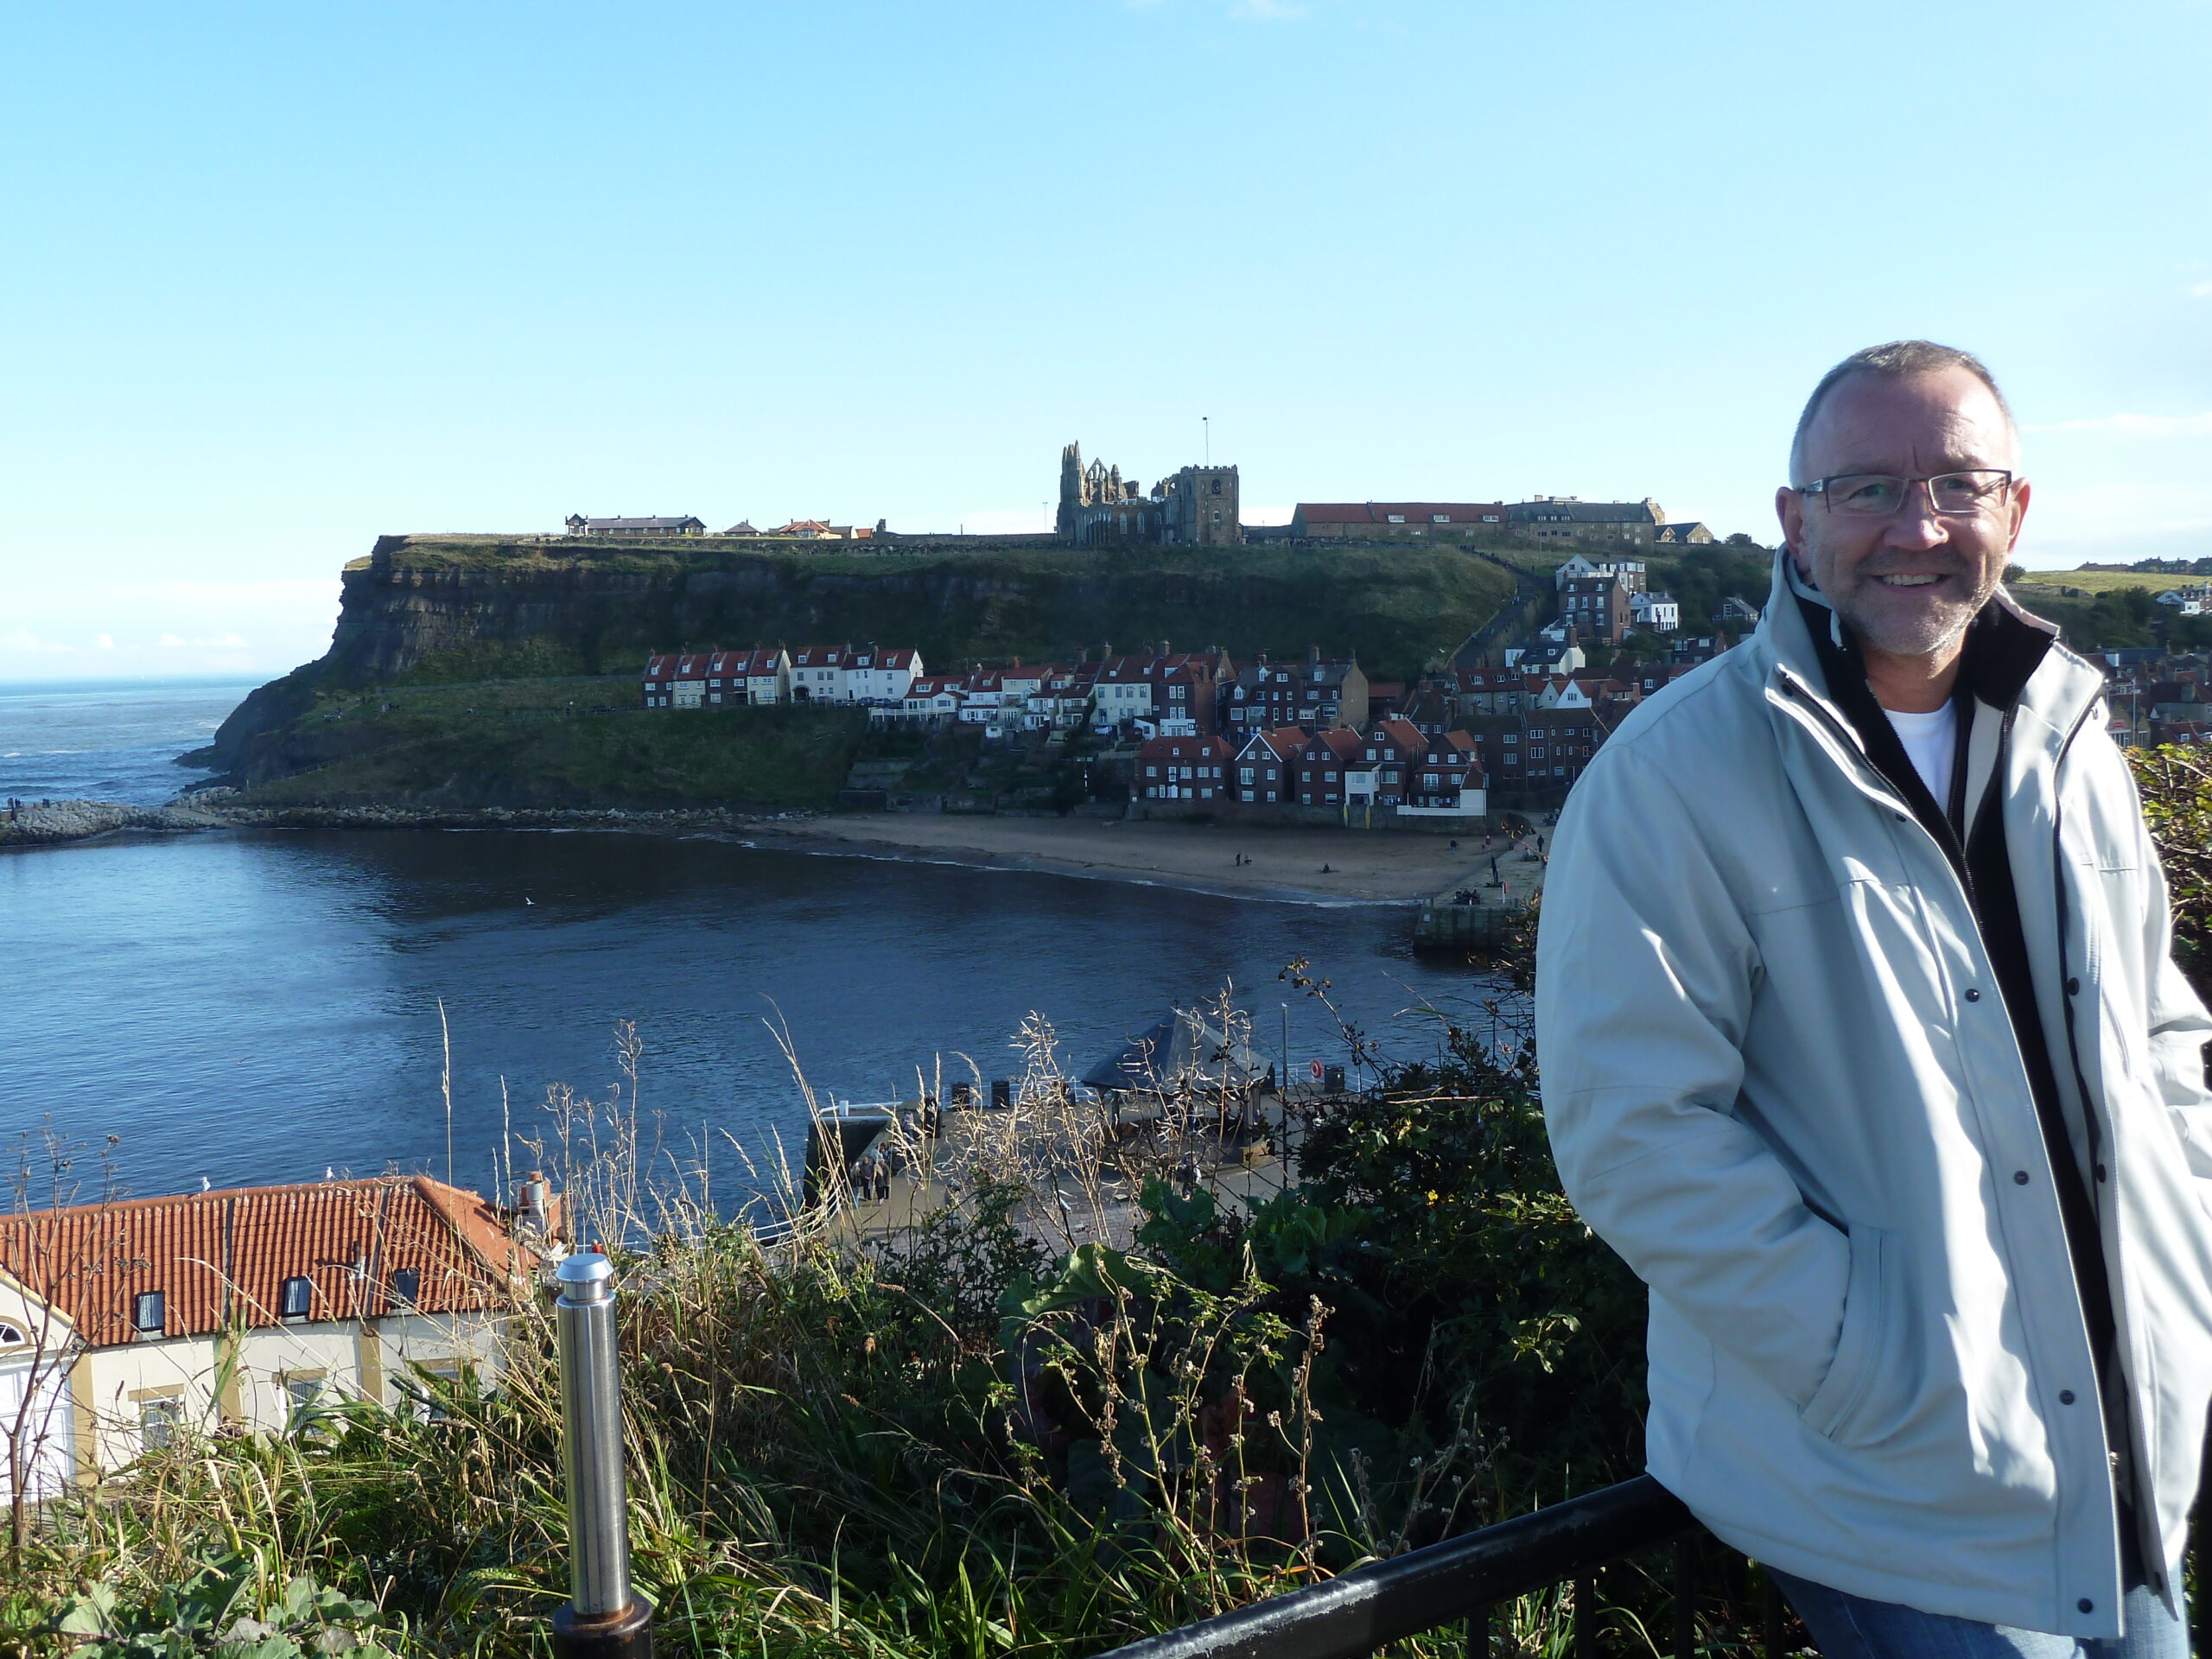 Chris visiting Whitby on the Yorkshire coast.